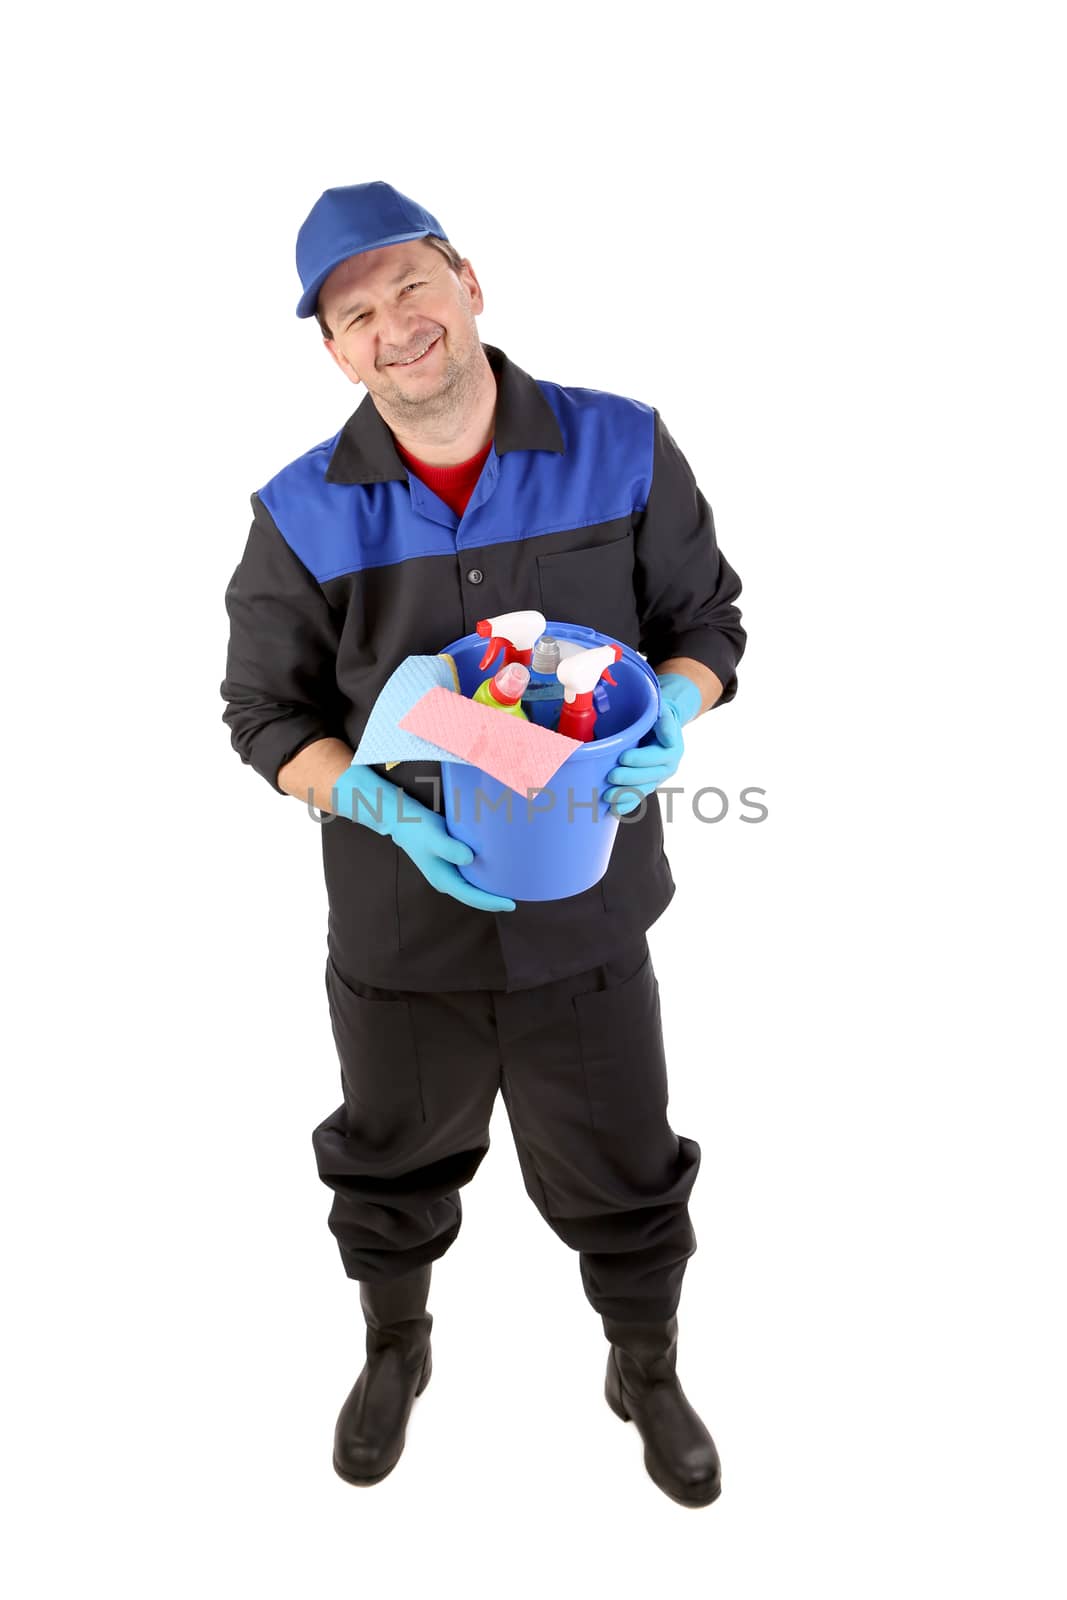 Man with cleaning supplies. Isolated on a white background.